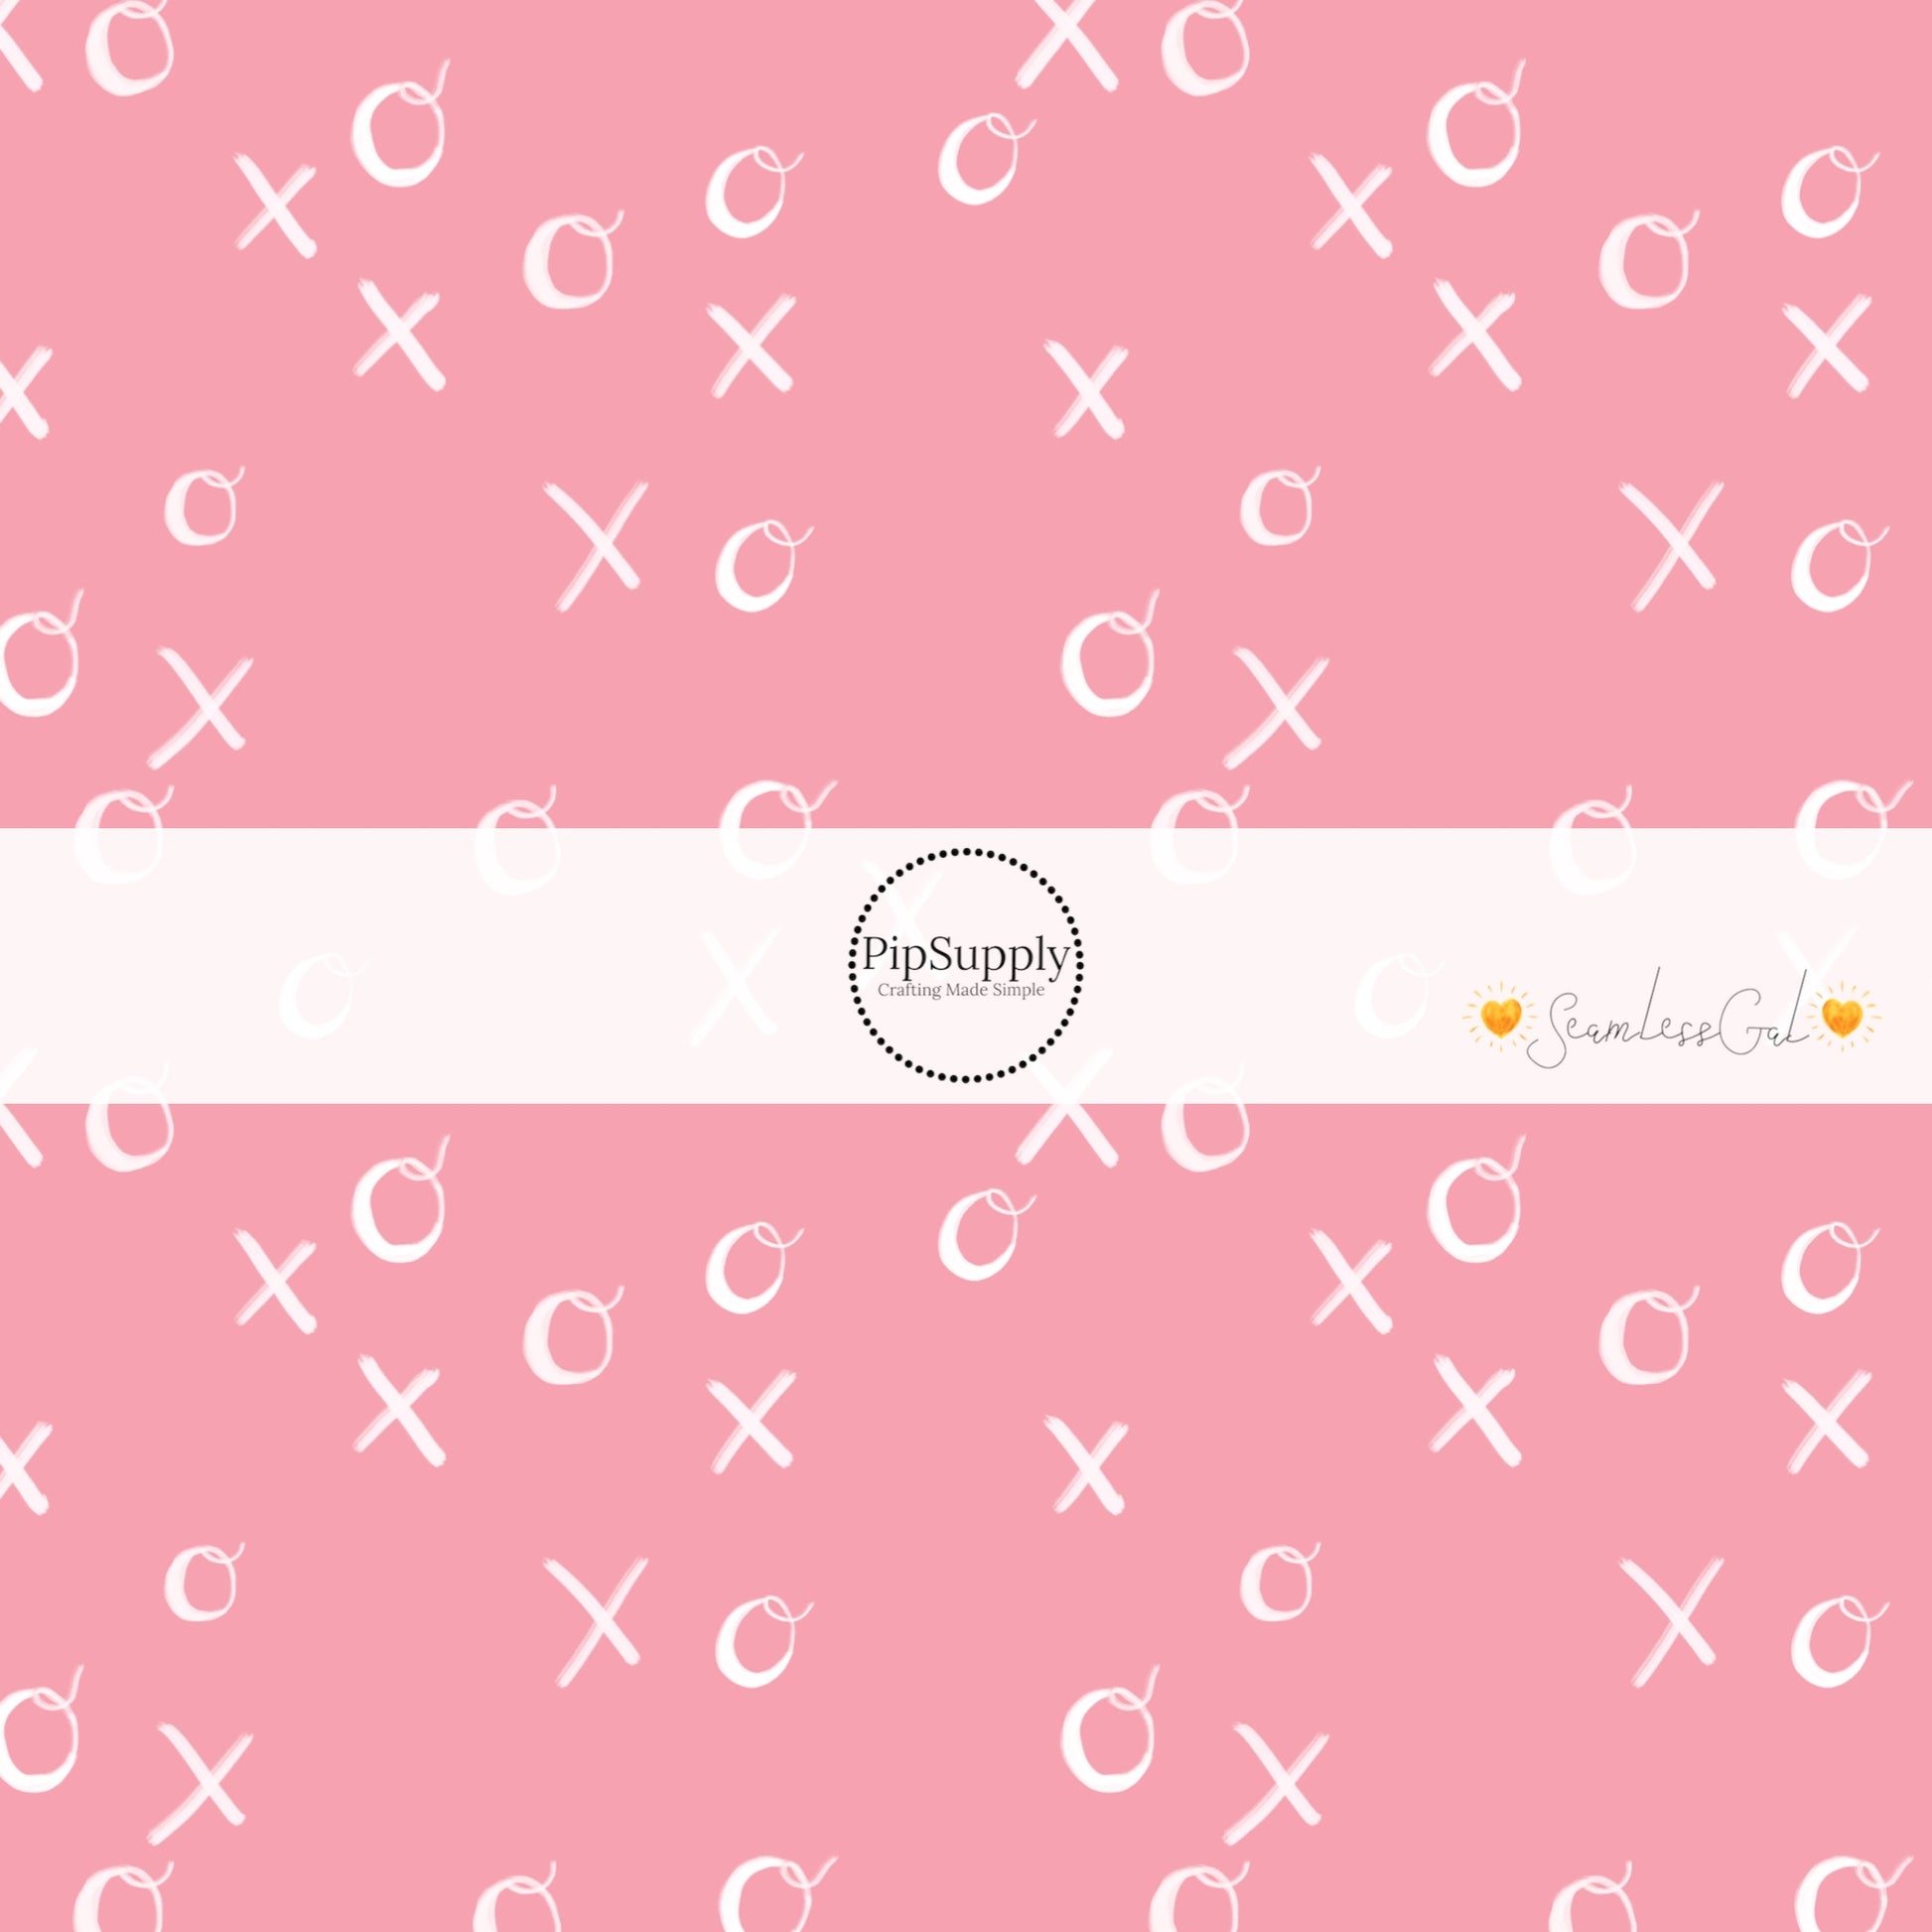 Warm Pink Fabric by the Yard with XO cursive